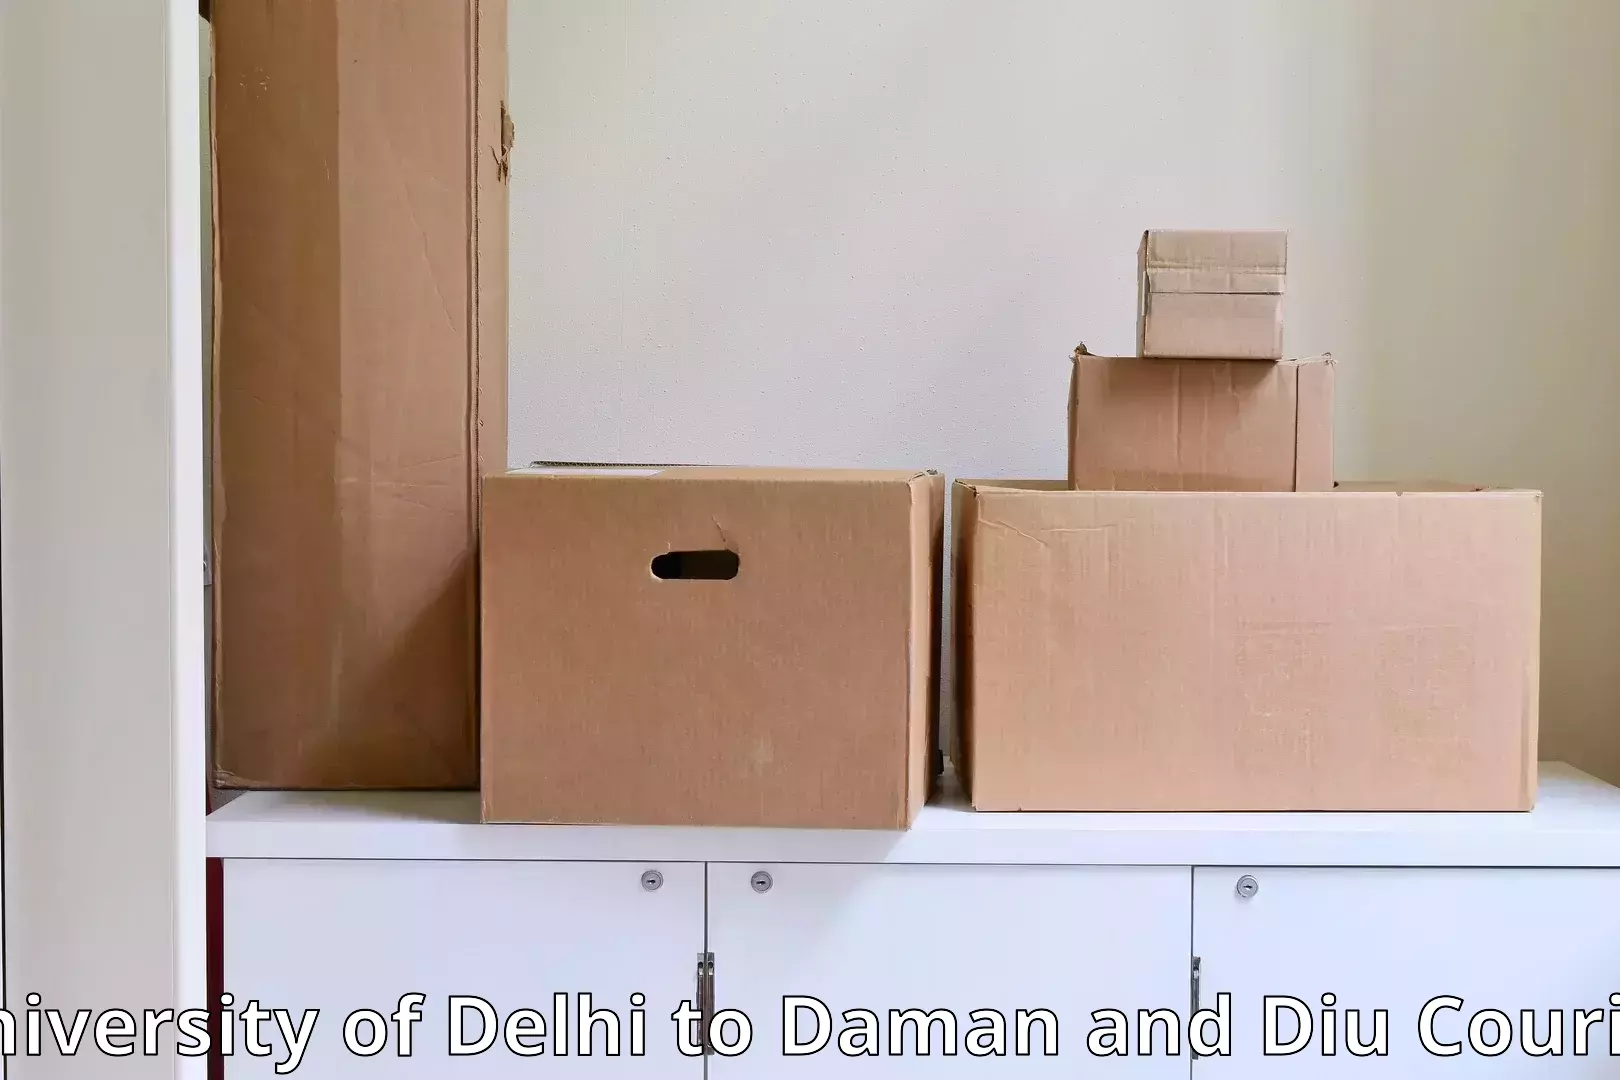 Professional household moving University of Delhi to Daman and Diu